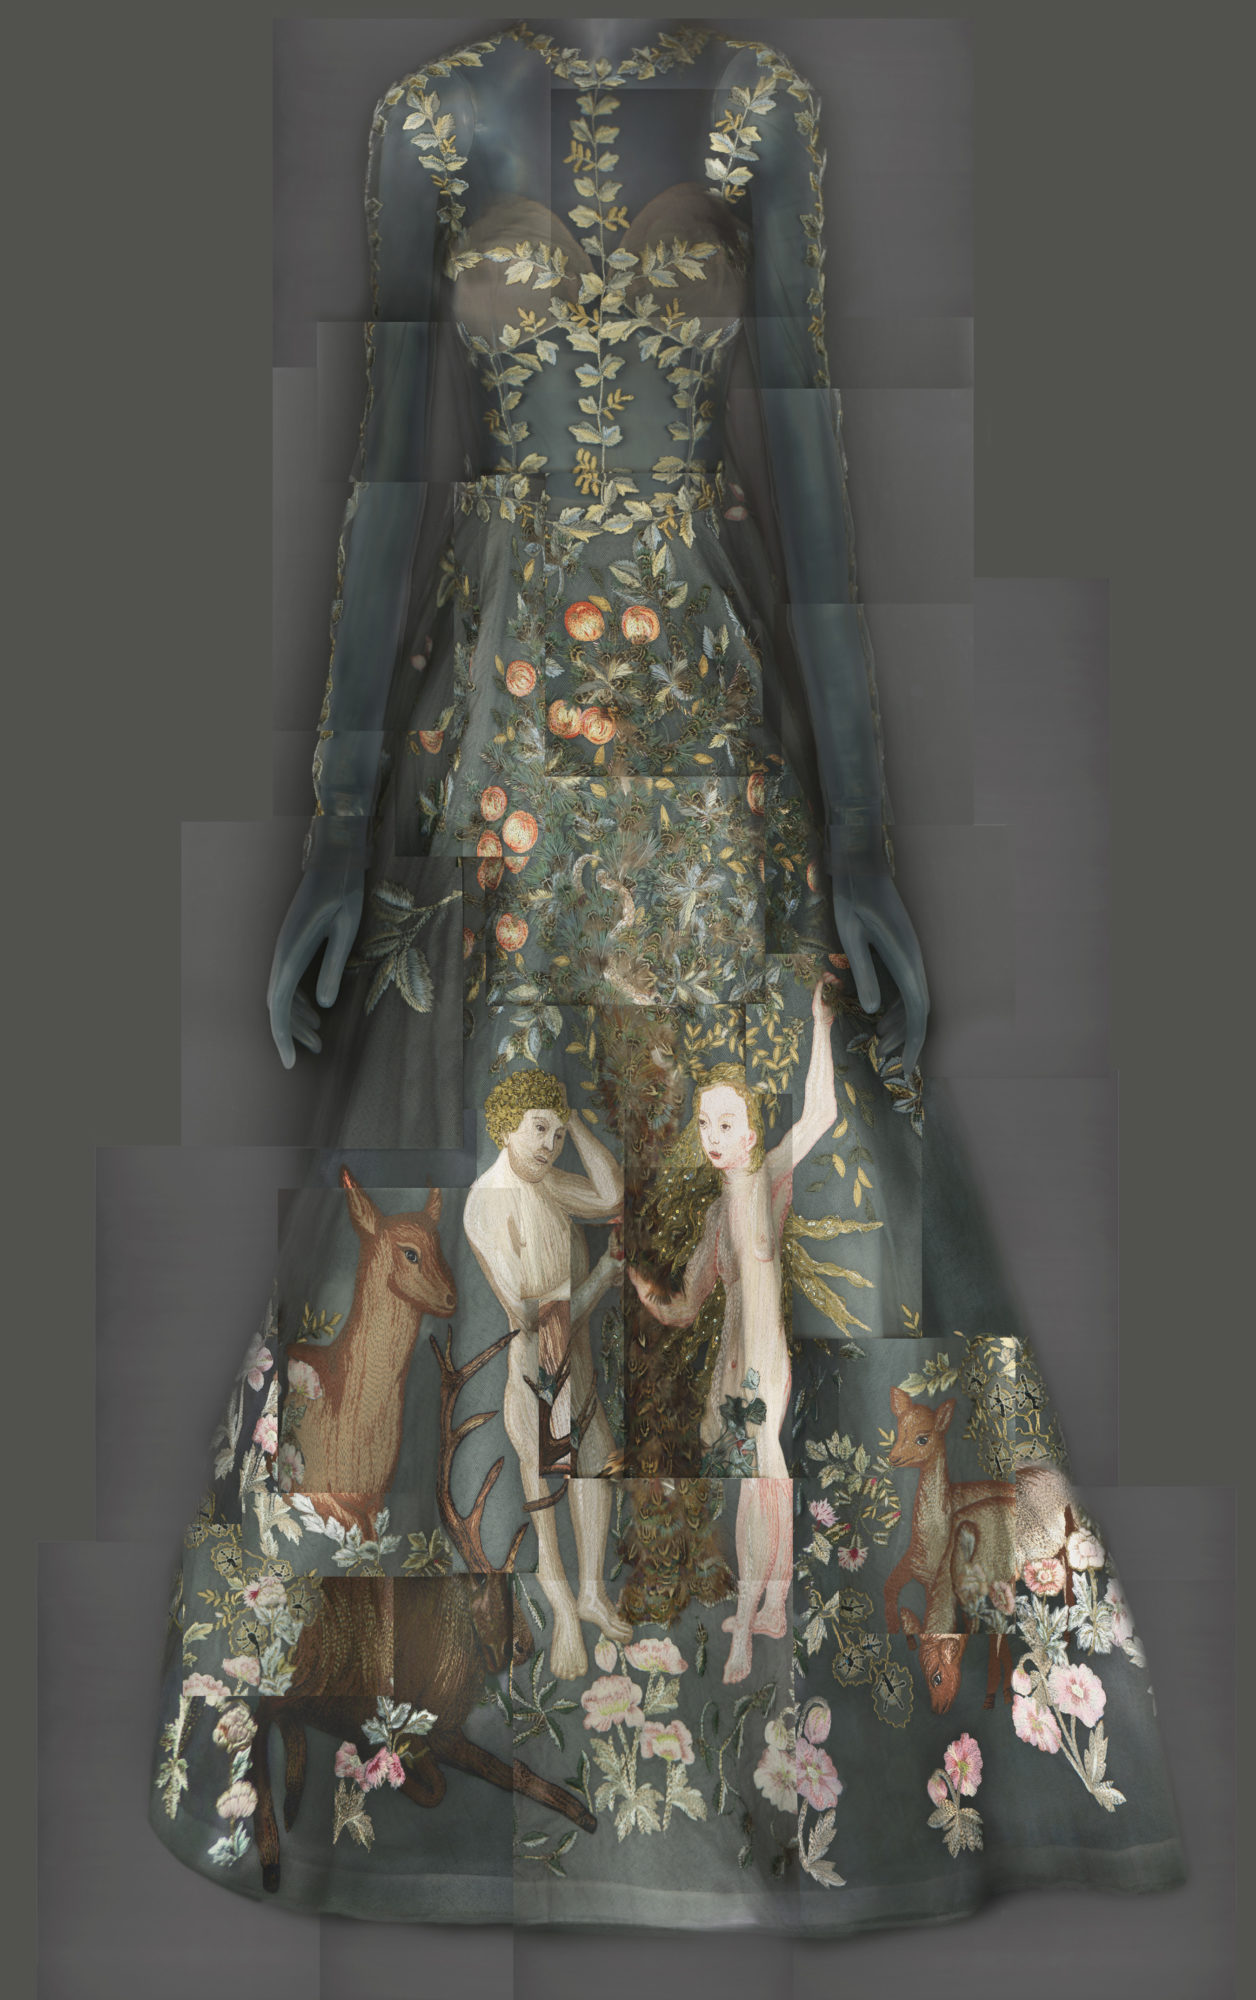 formal gown depicting an illustration of Adam and Eve, deer, a tree, and flowers on the fabric against a gray background